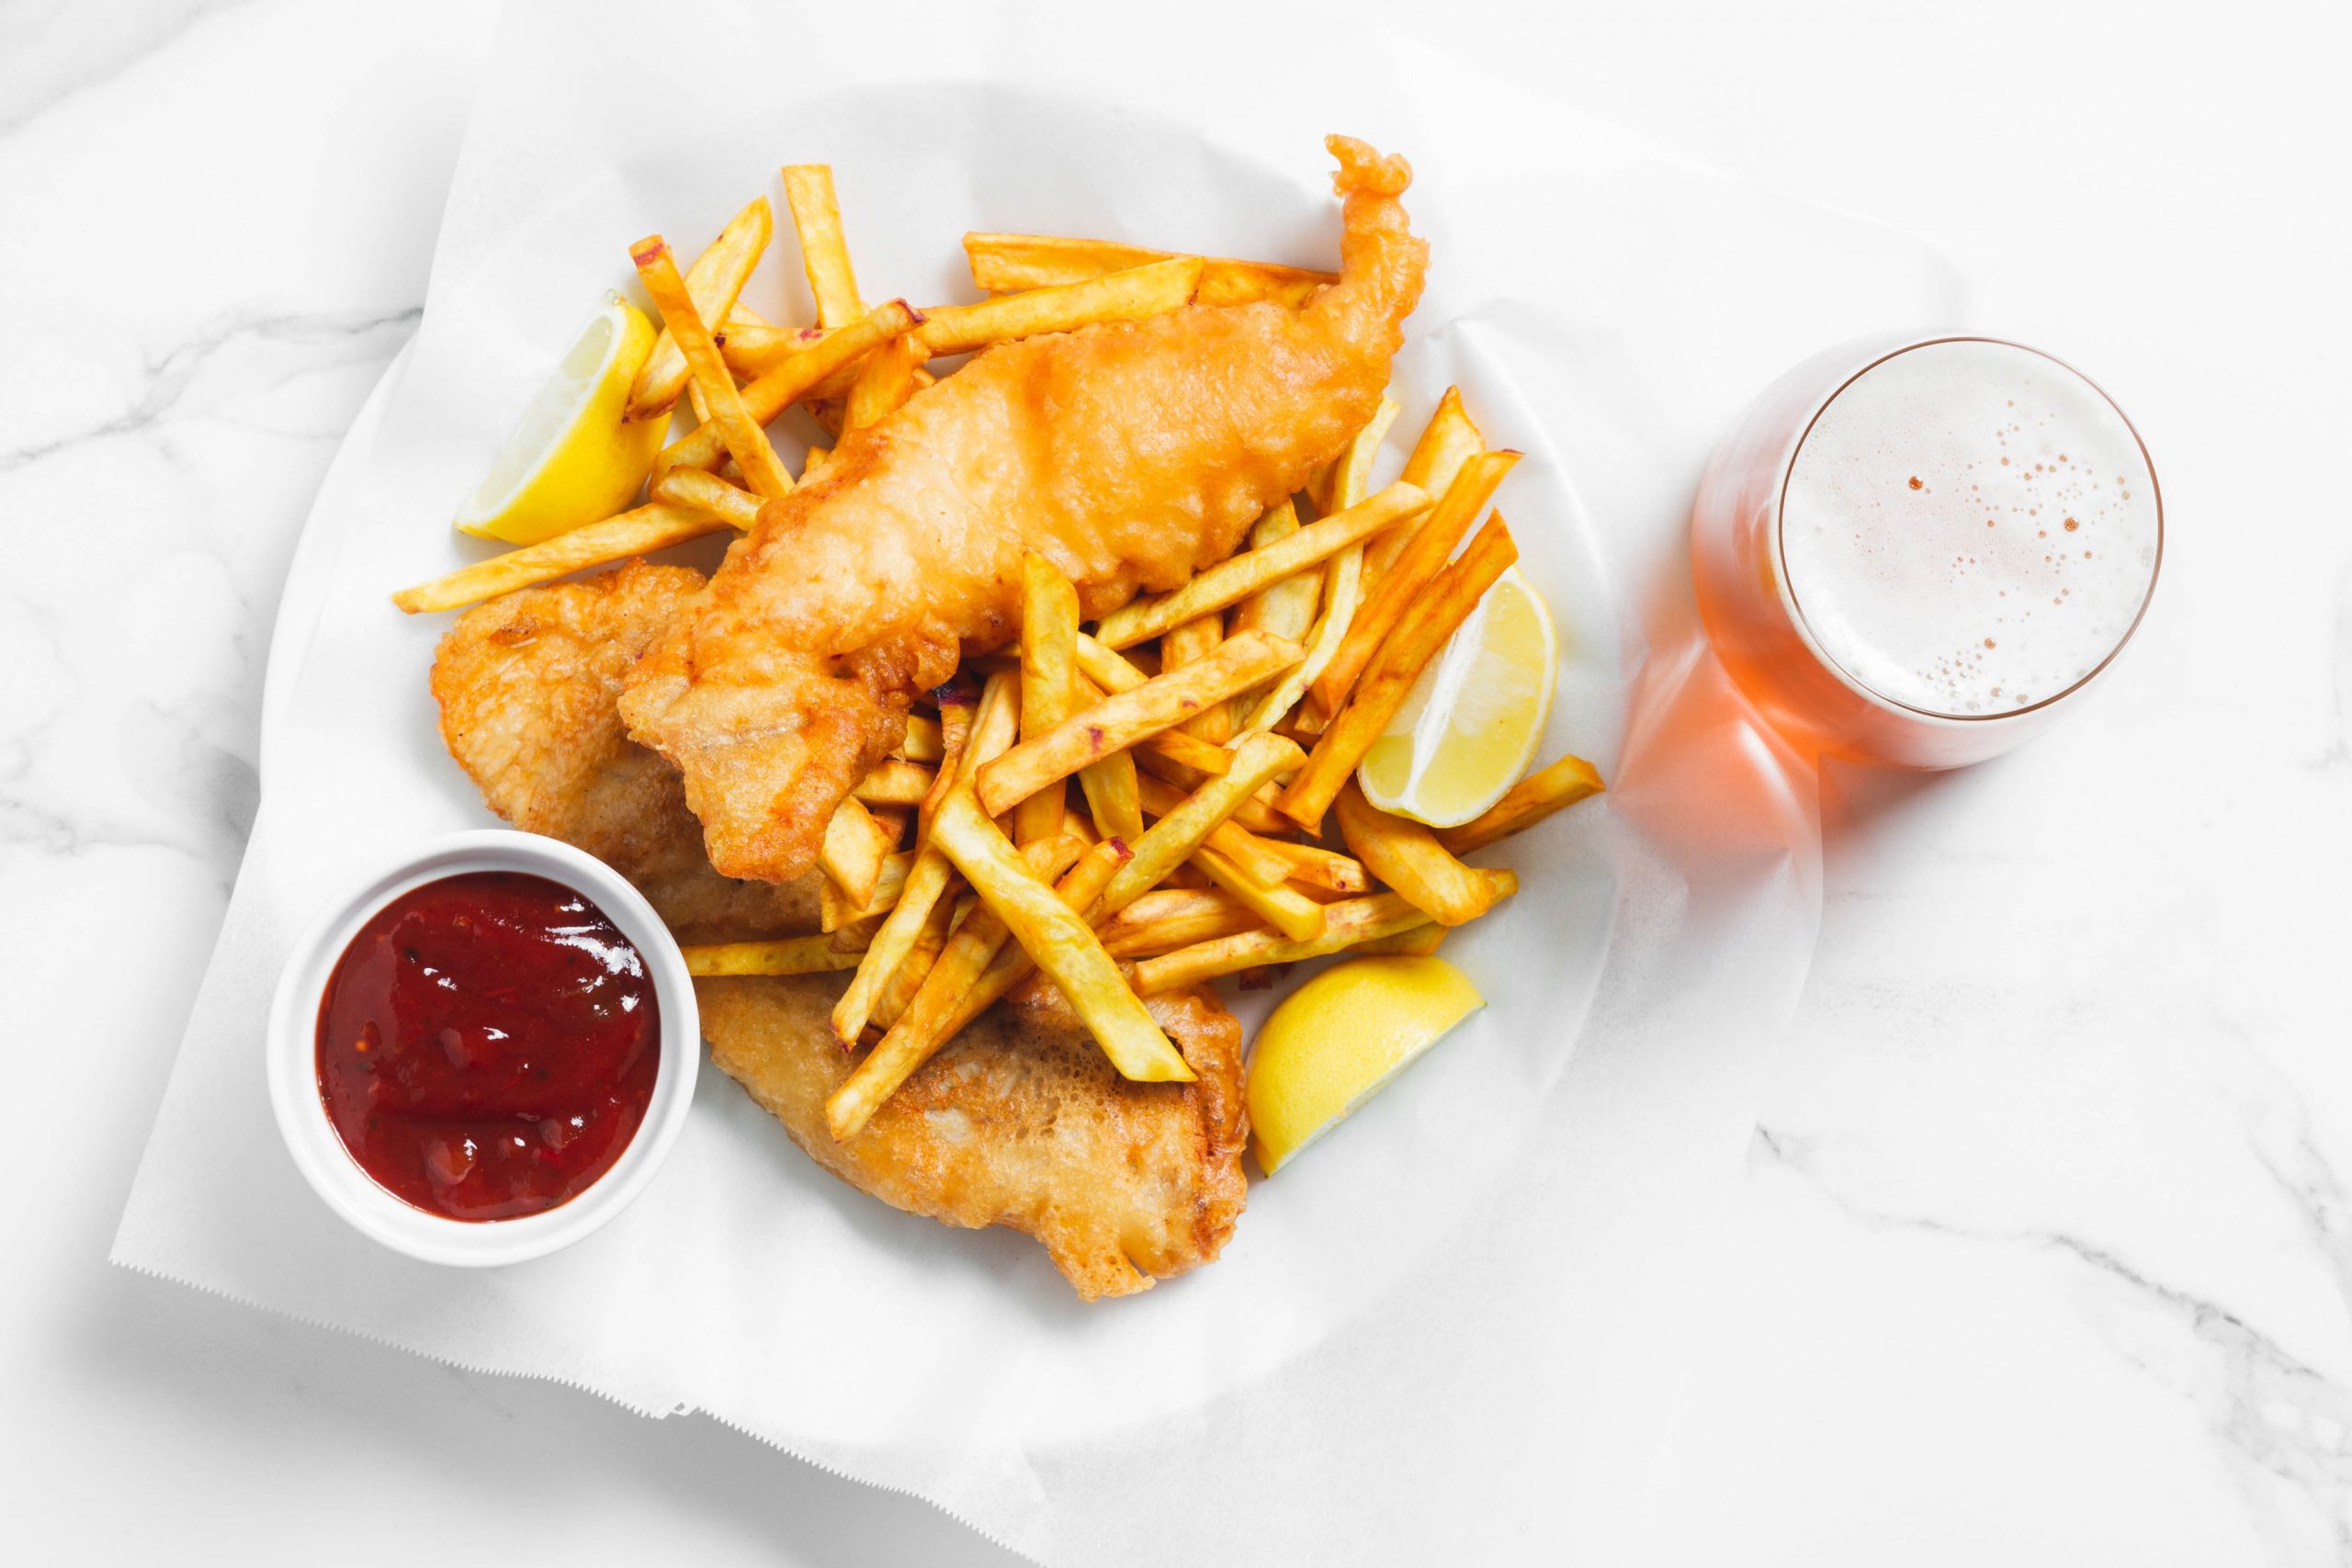 beer battered fish and chips with lemon and tomato relish